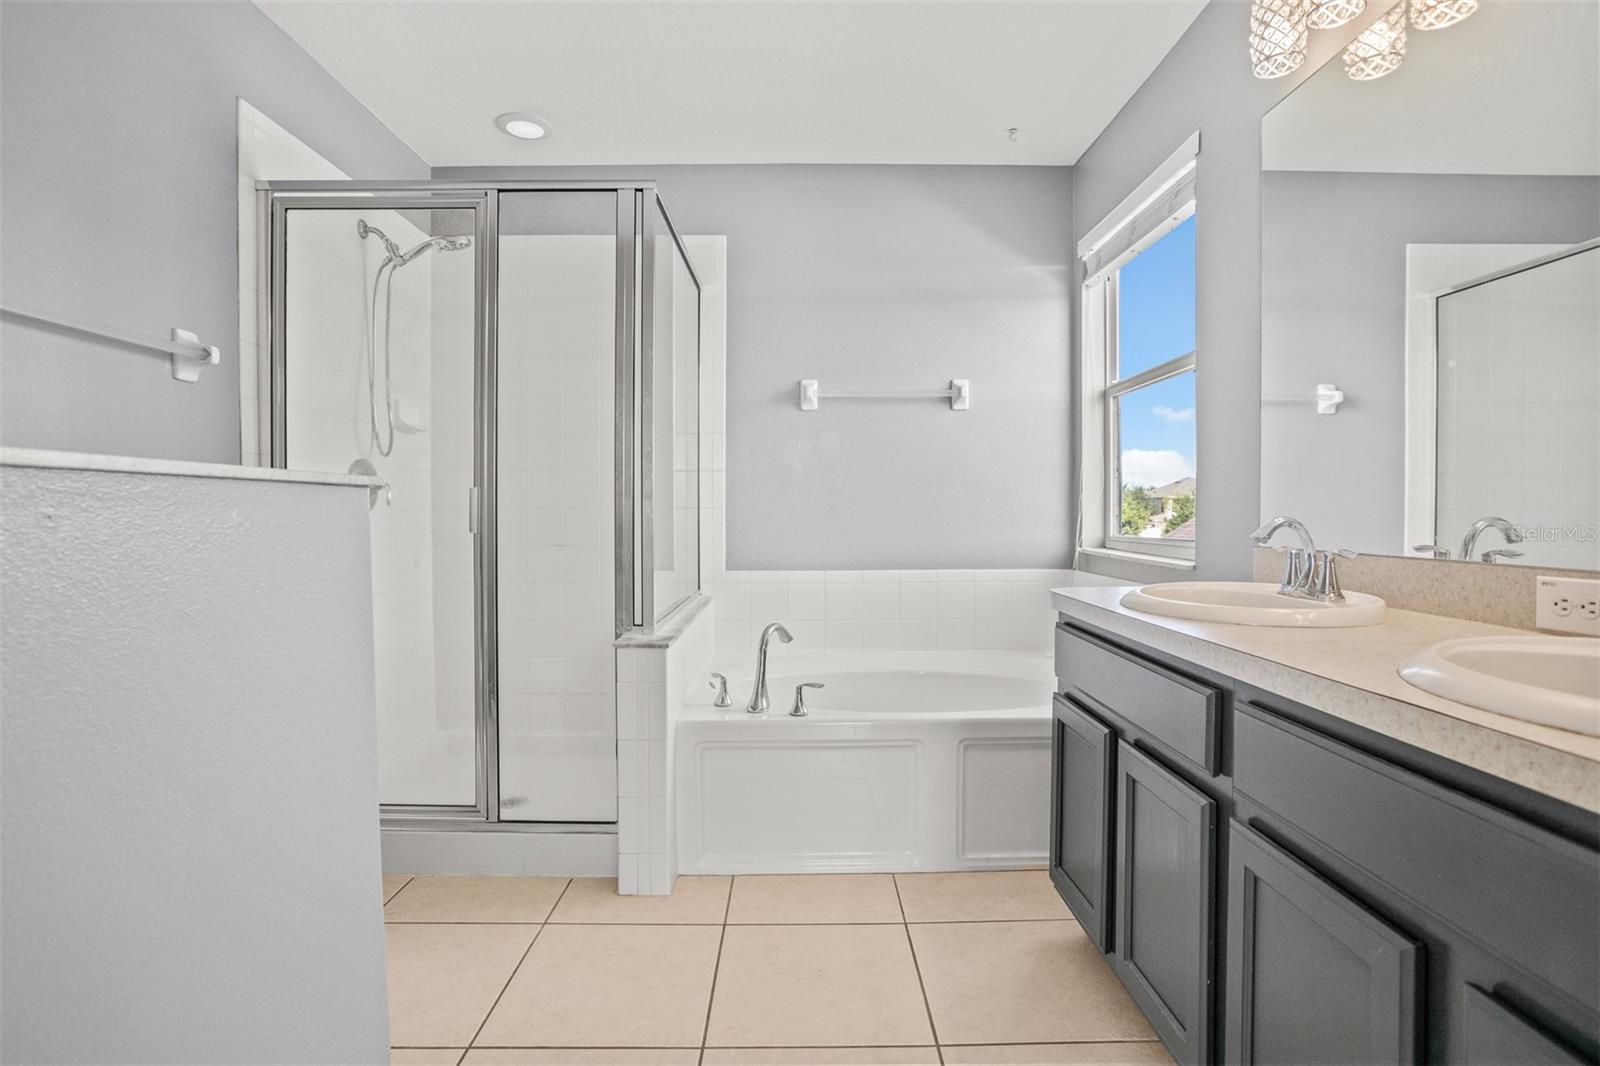 Large master bathroom with stone countertops